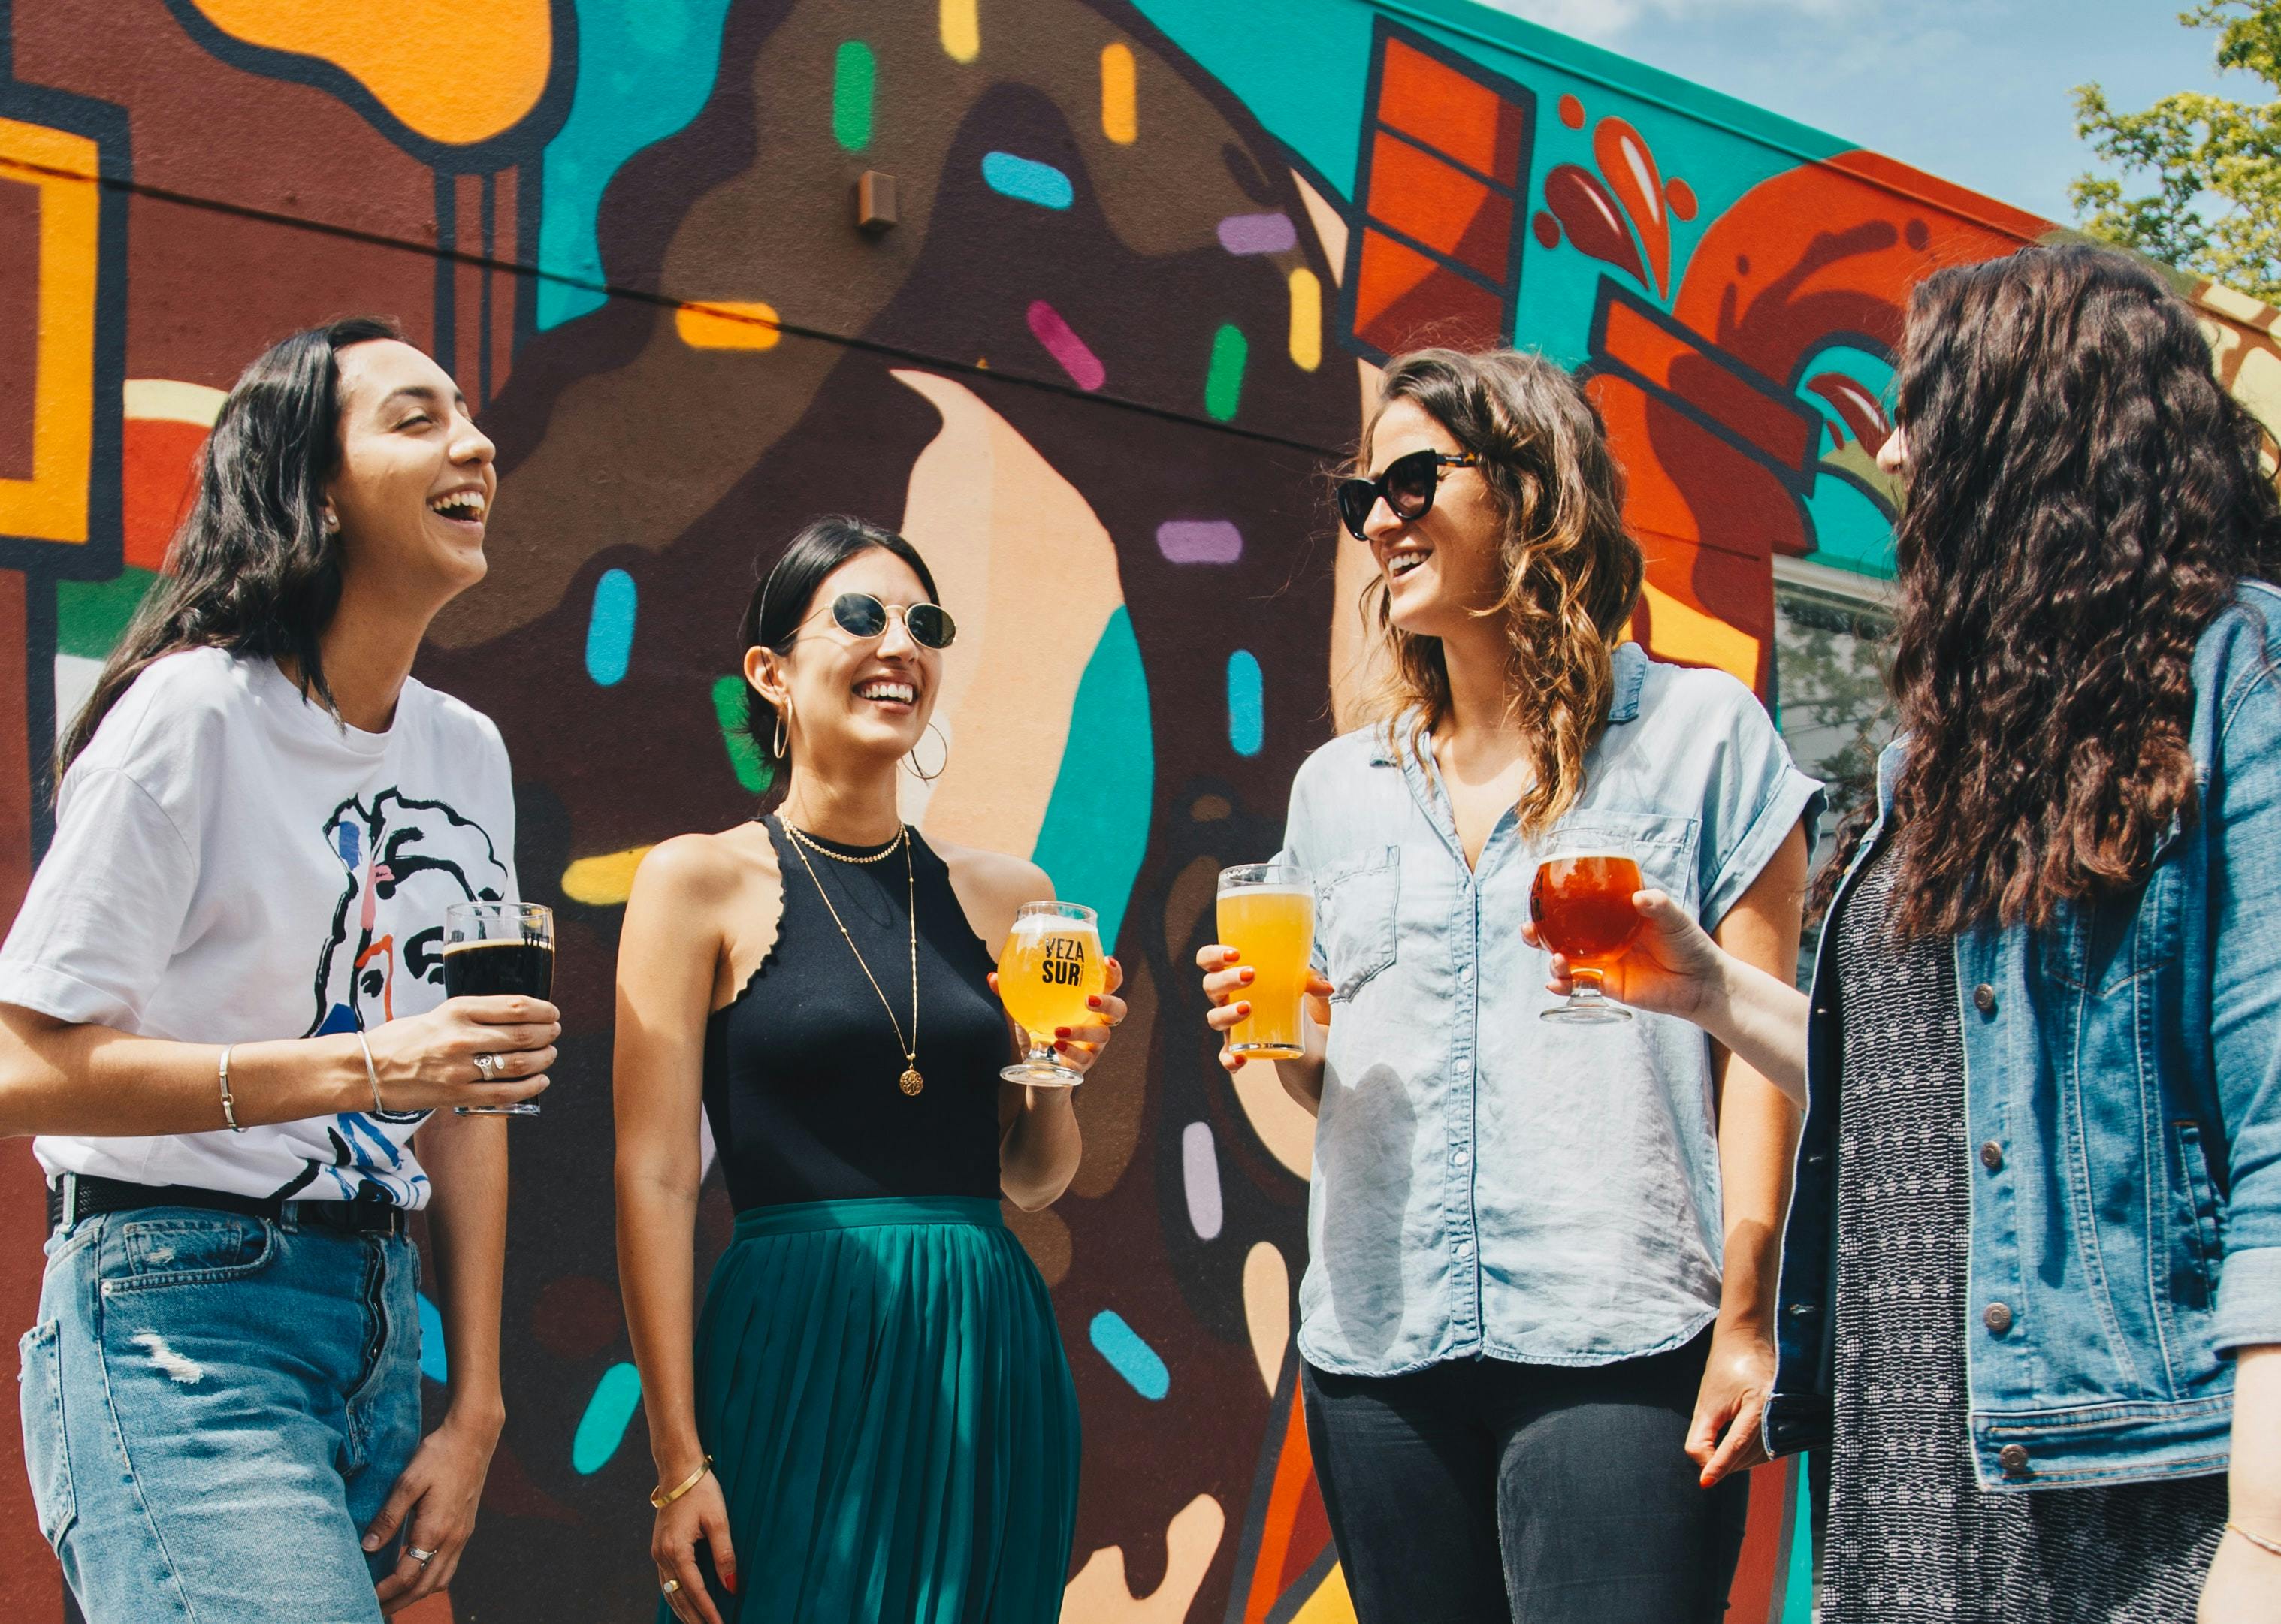 A group of people against a colorful mural, holding drinks and smiling.